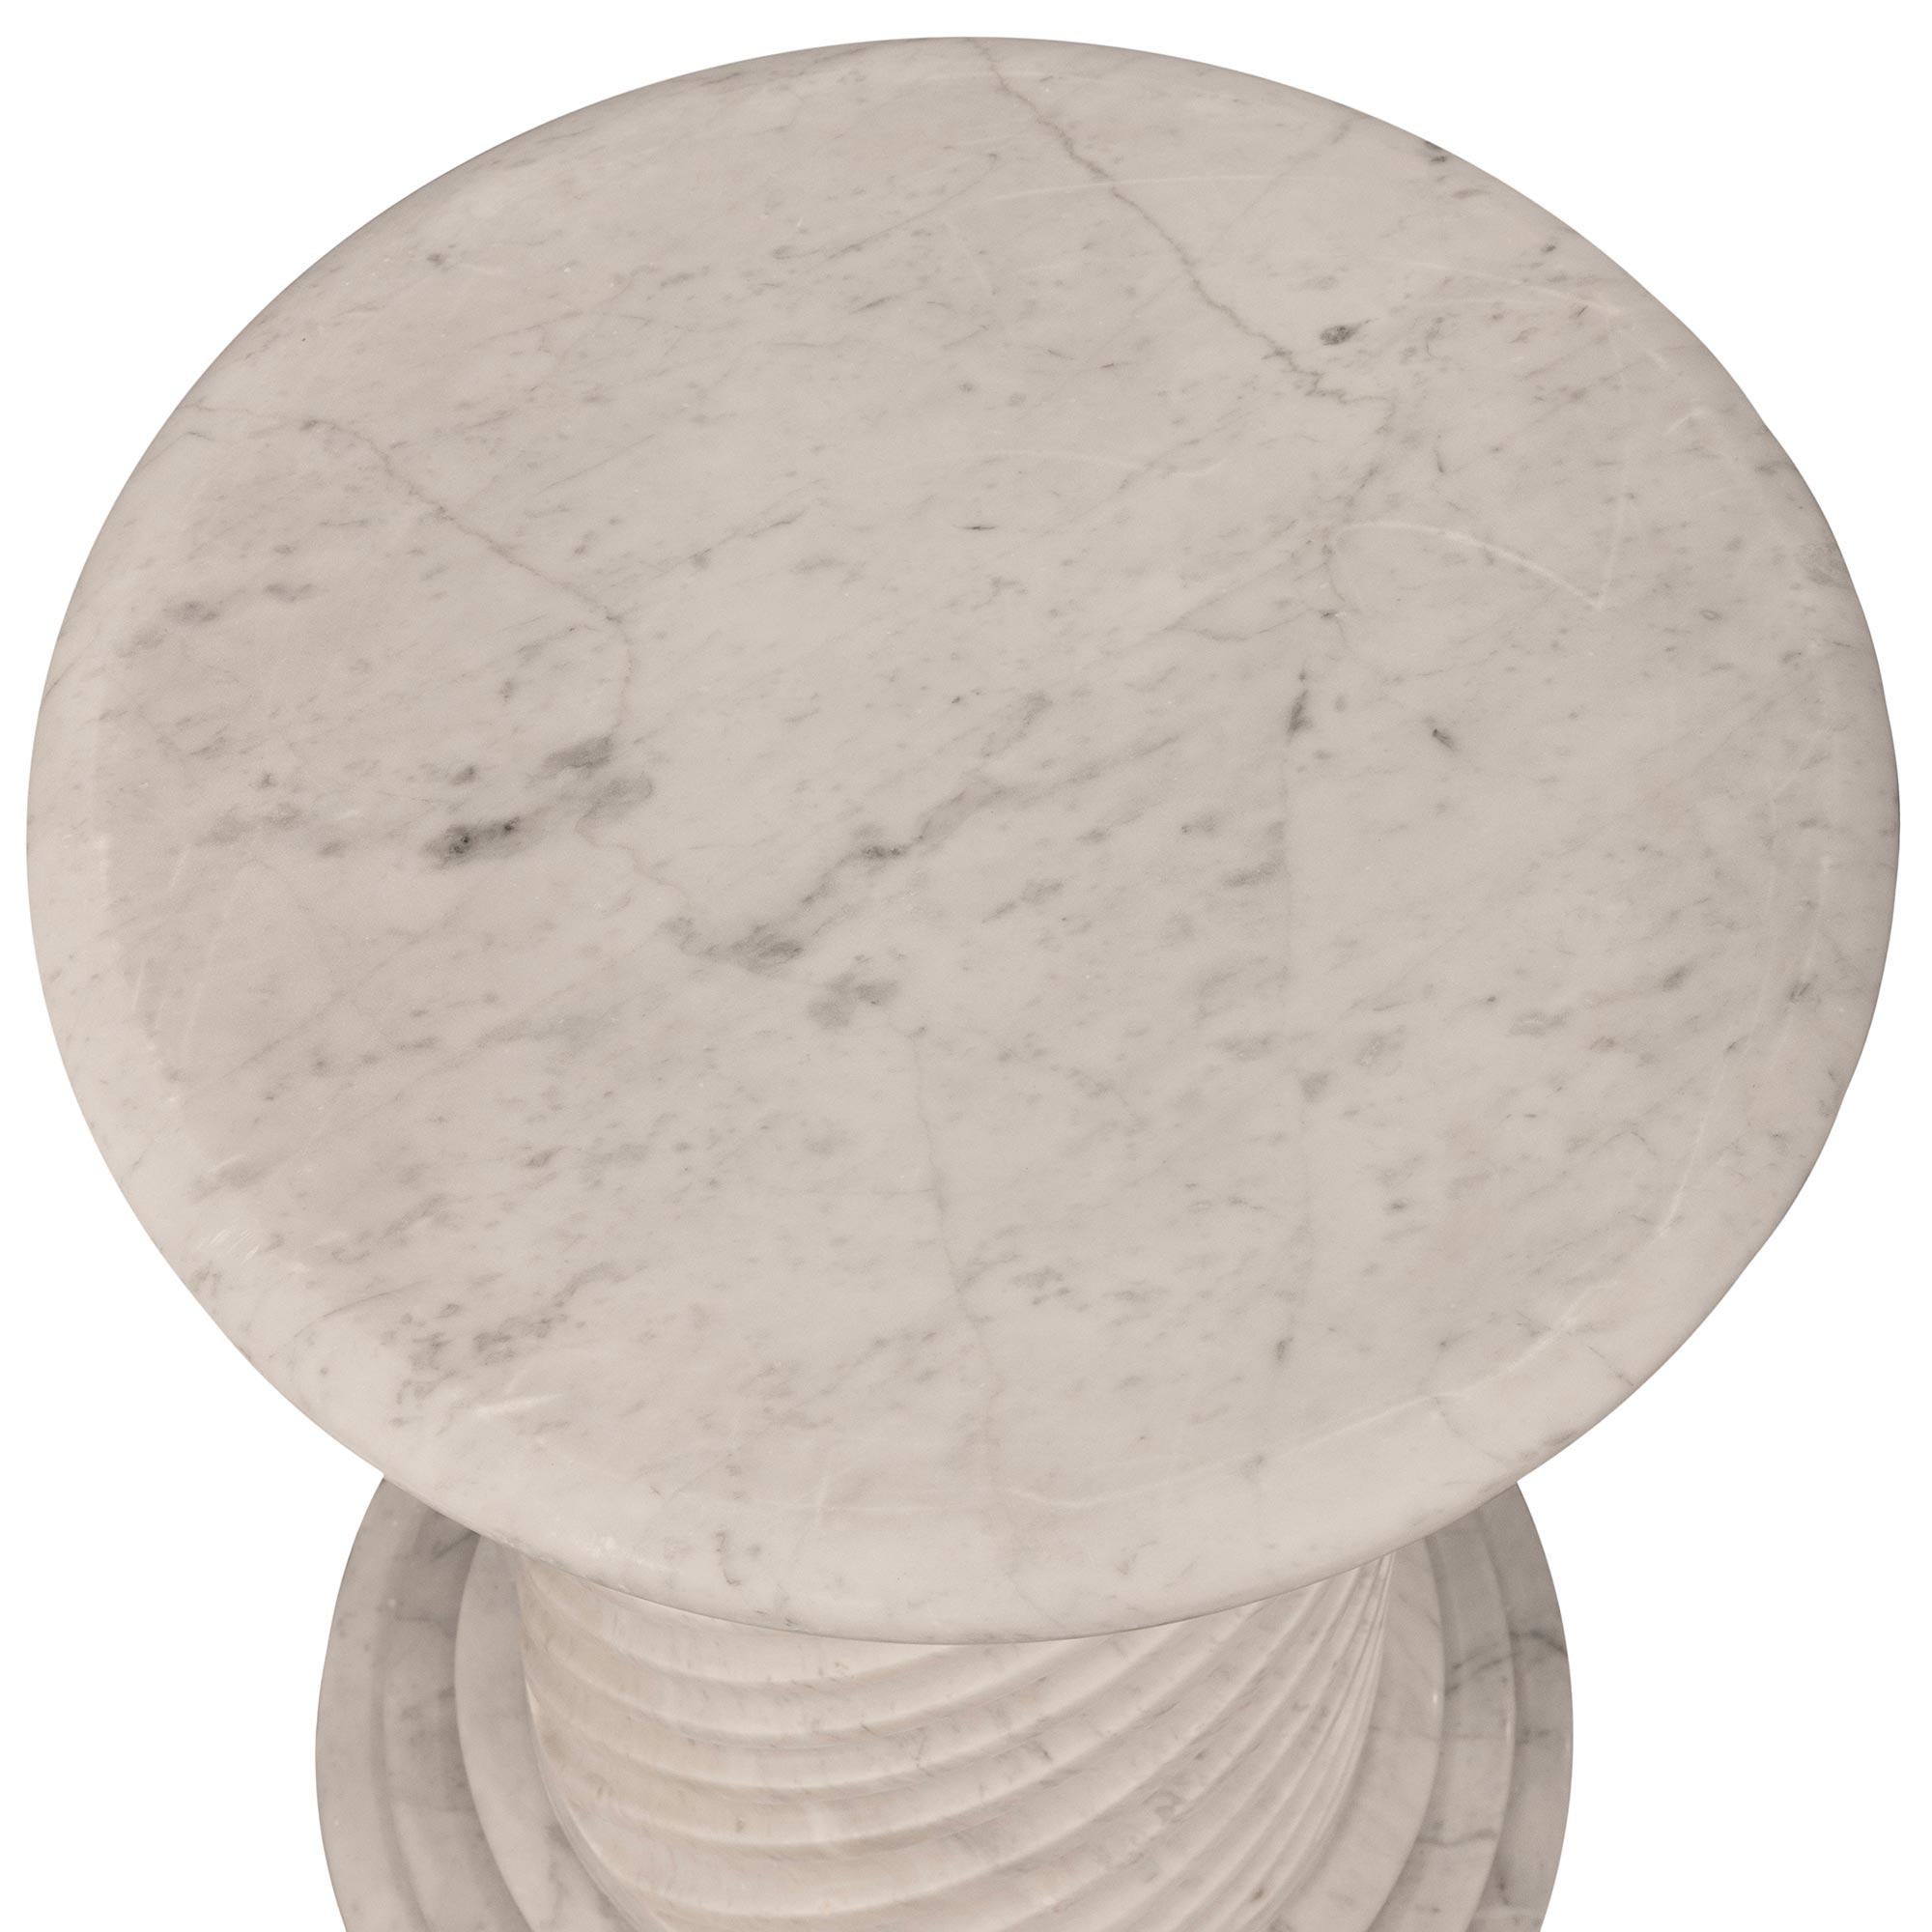 A stunning Italian 19th century Louis XVI st. white Carrara marble pedestal. This exquisite circular pedestal is raised by a three level stepped plinth. The shaft is wonderfully designed with spiral fluted patterns leading up to the capital. The